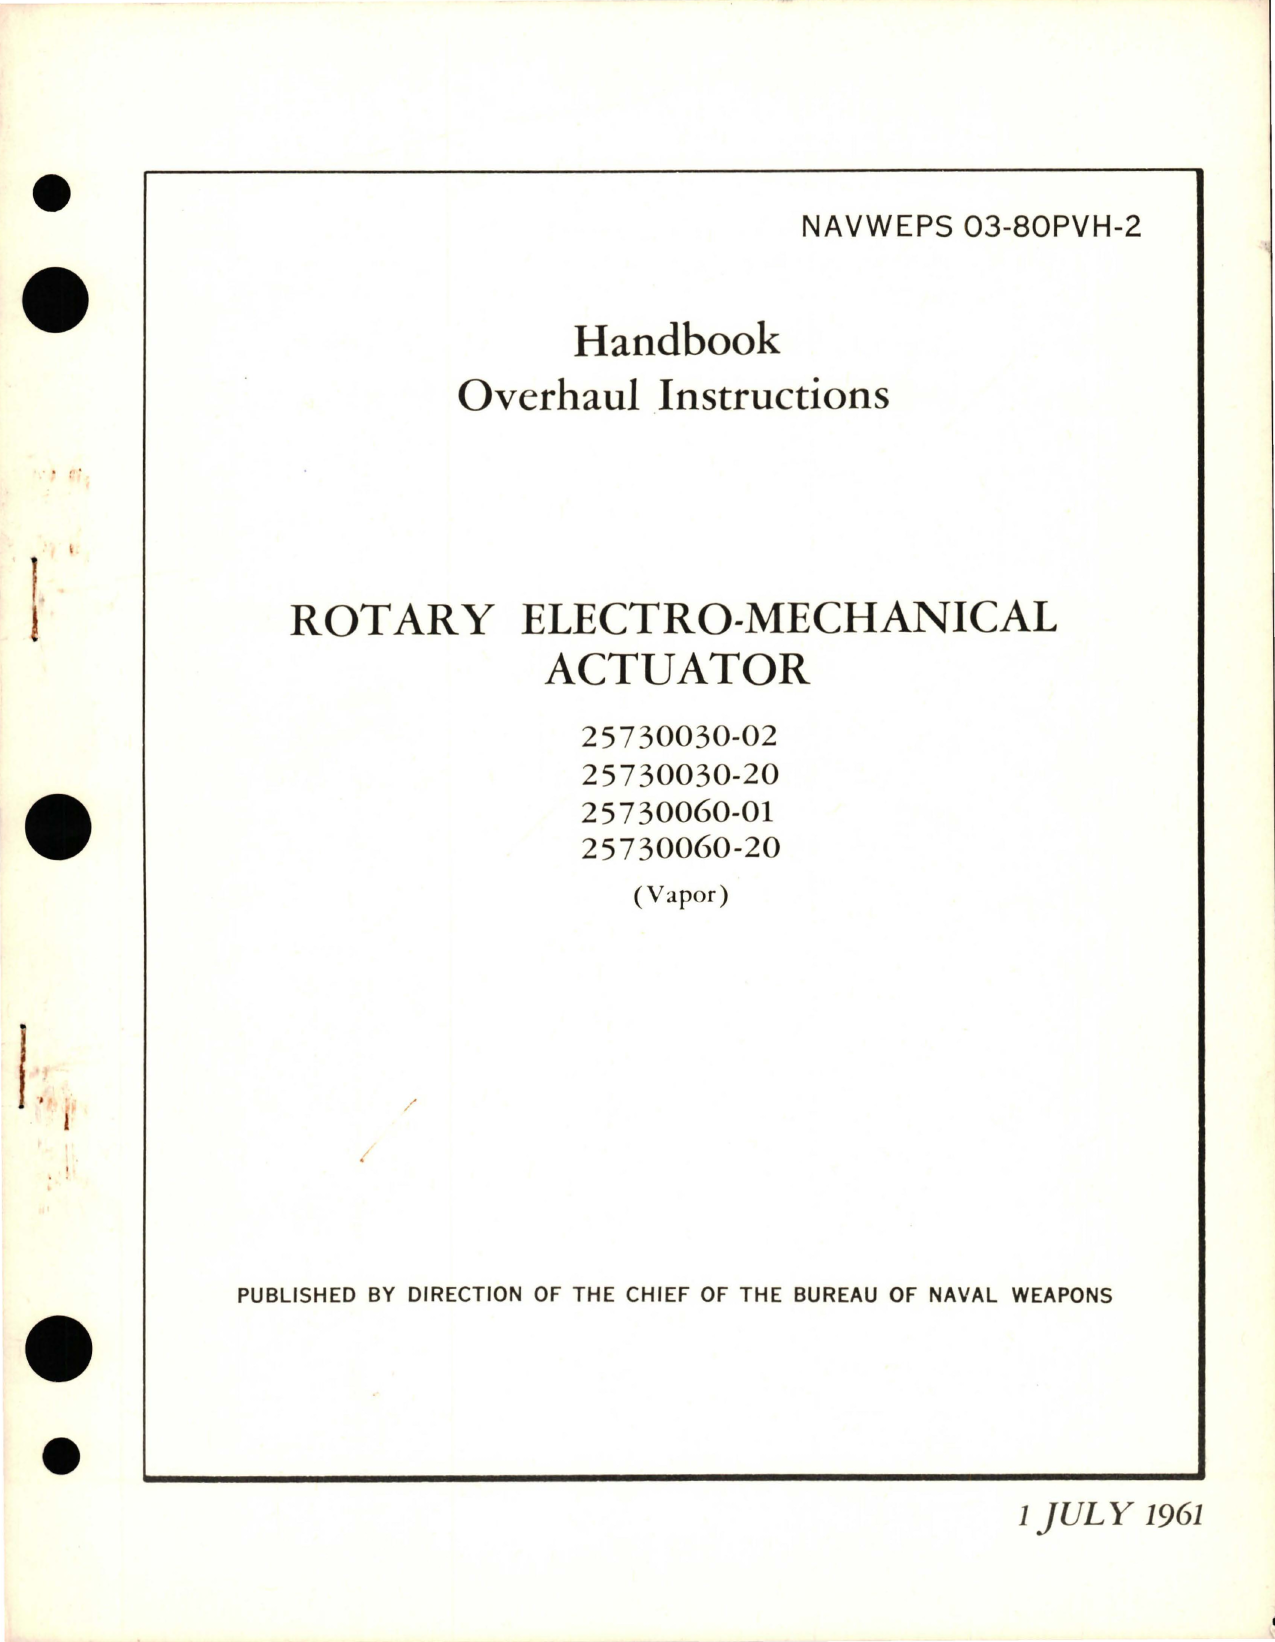 Sample page 1 from AirCorps Library document: Overhaul Instructions for Rotary Electro-Mechanical Actuator - Parts 25730030-02, 25730030-20, 25730060-01, and 25730060-20 